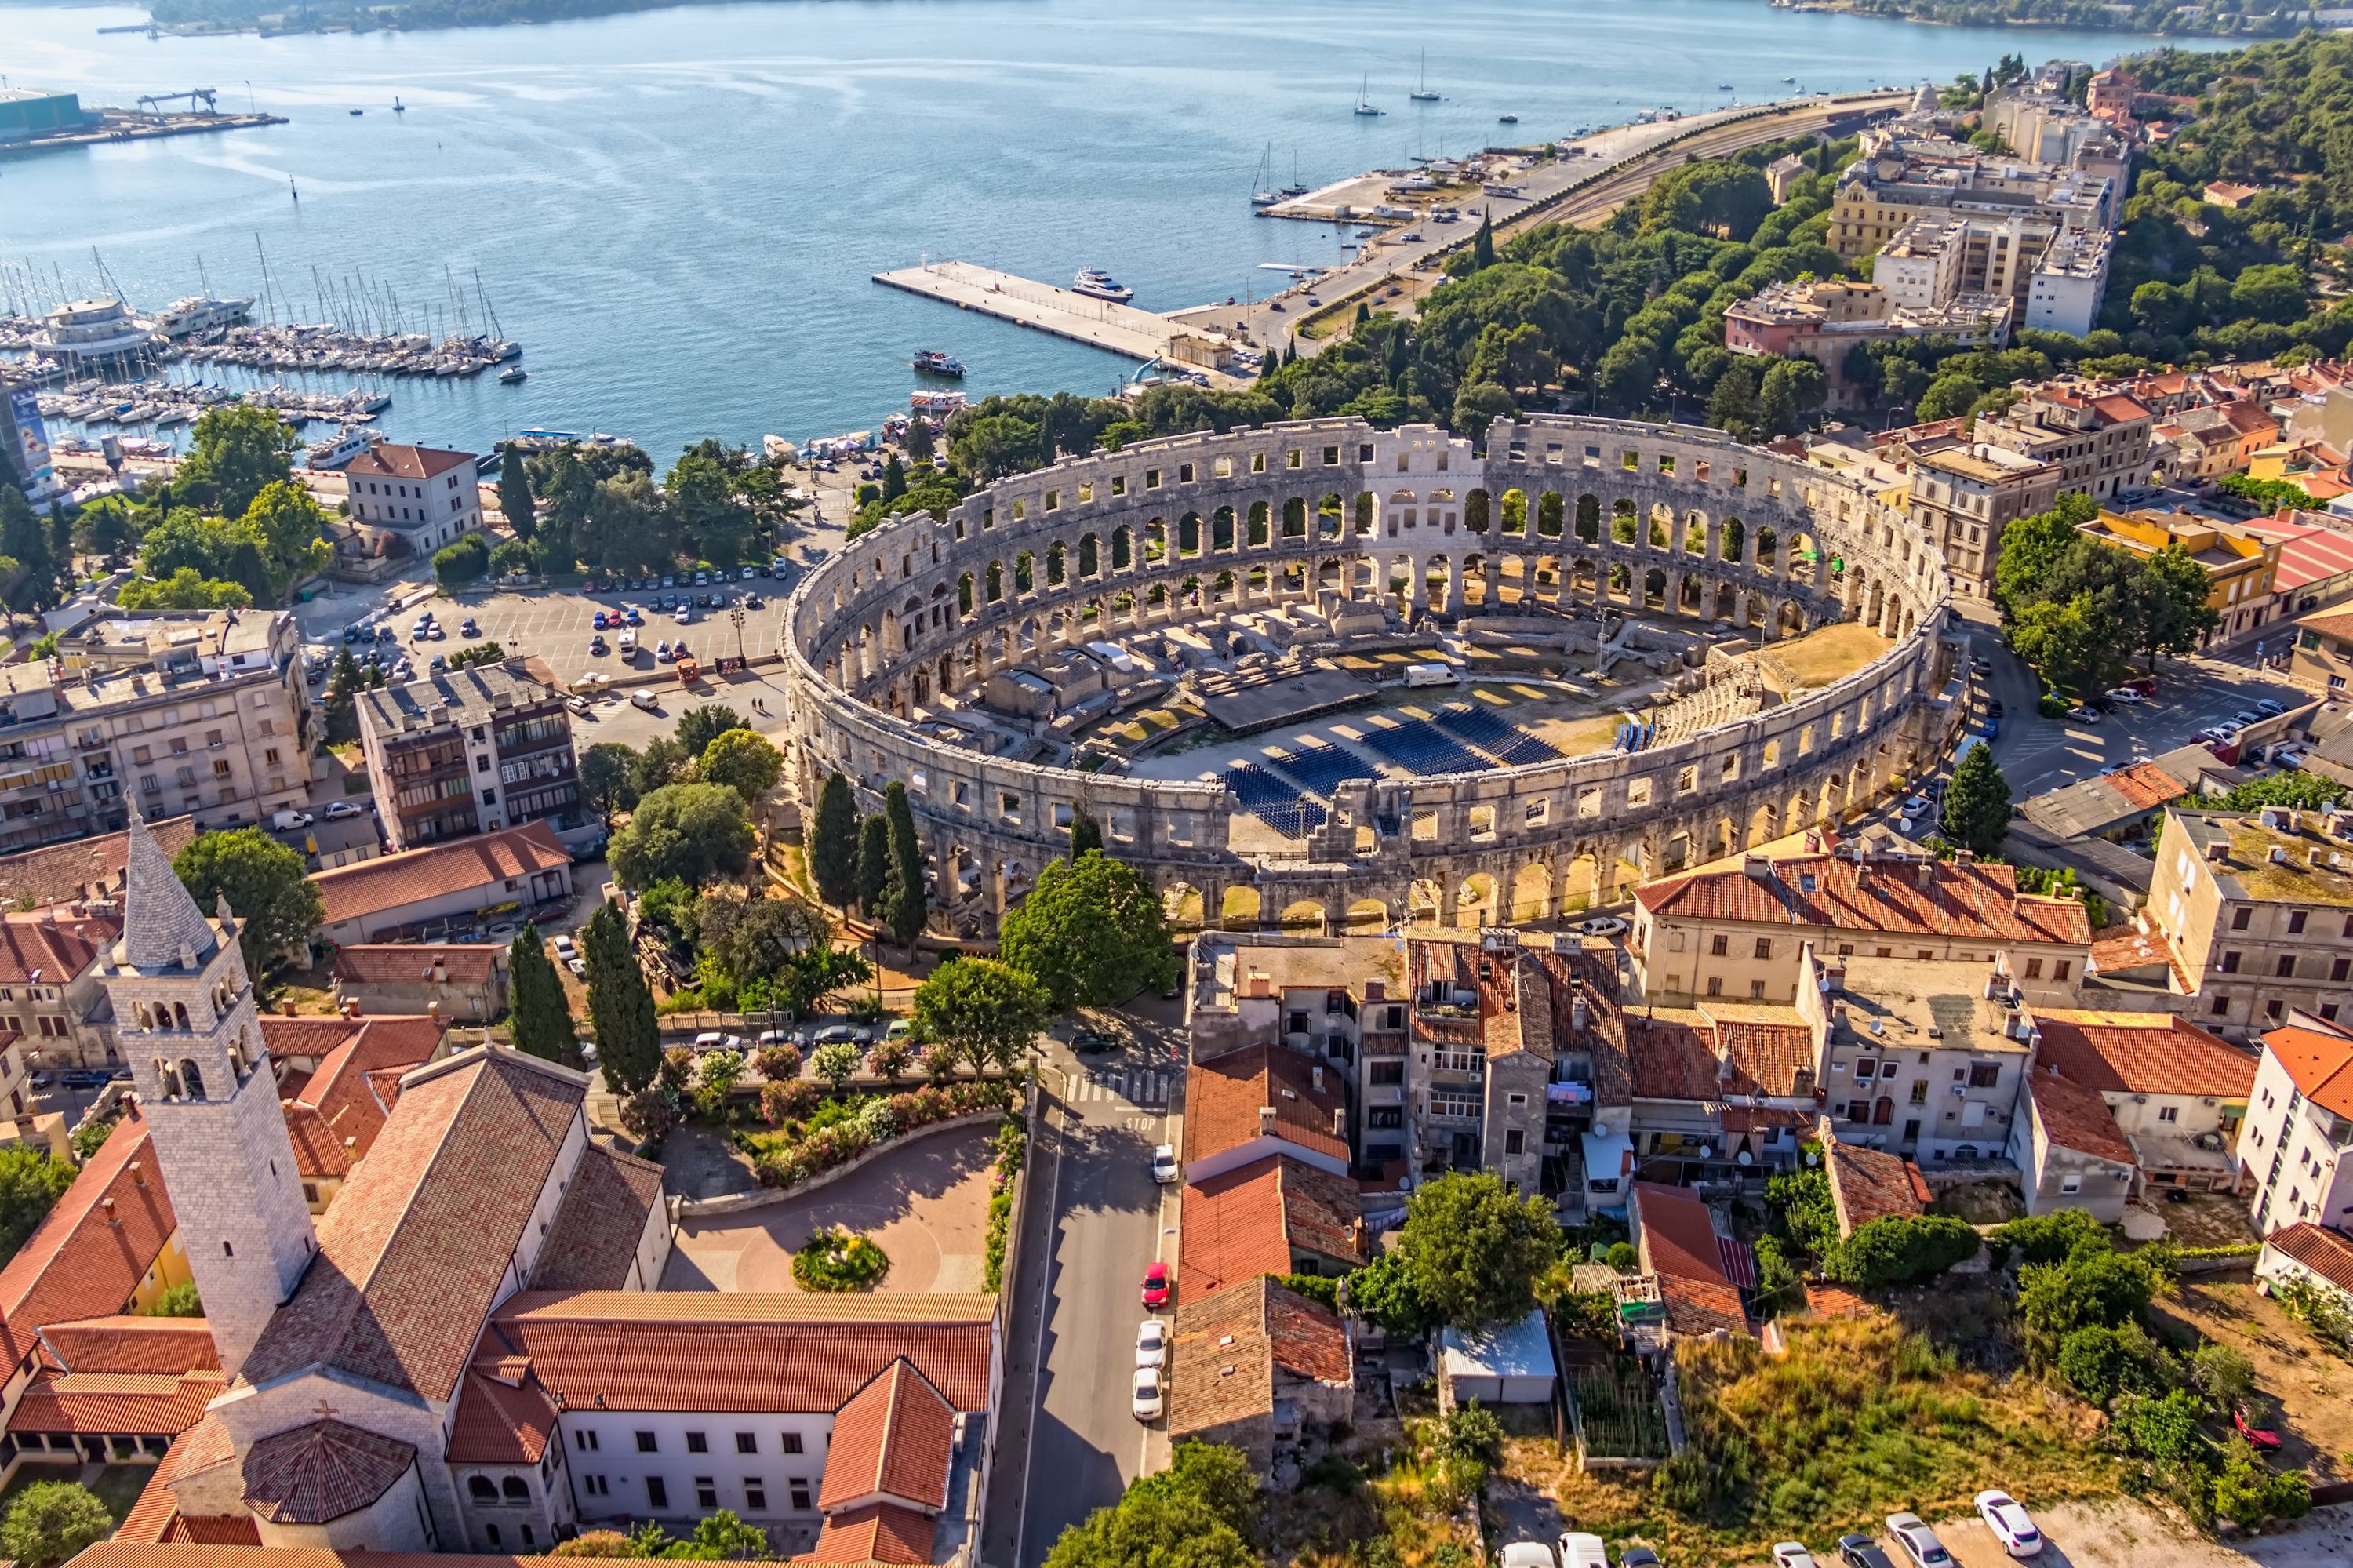 Aerial view of Pula